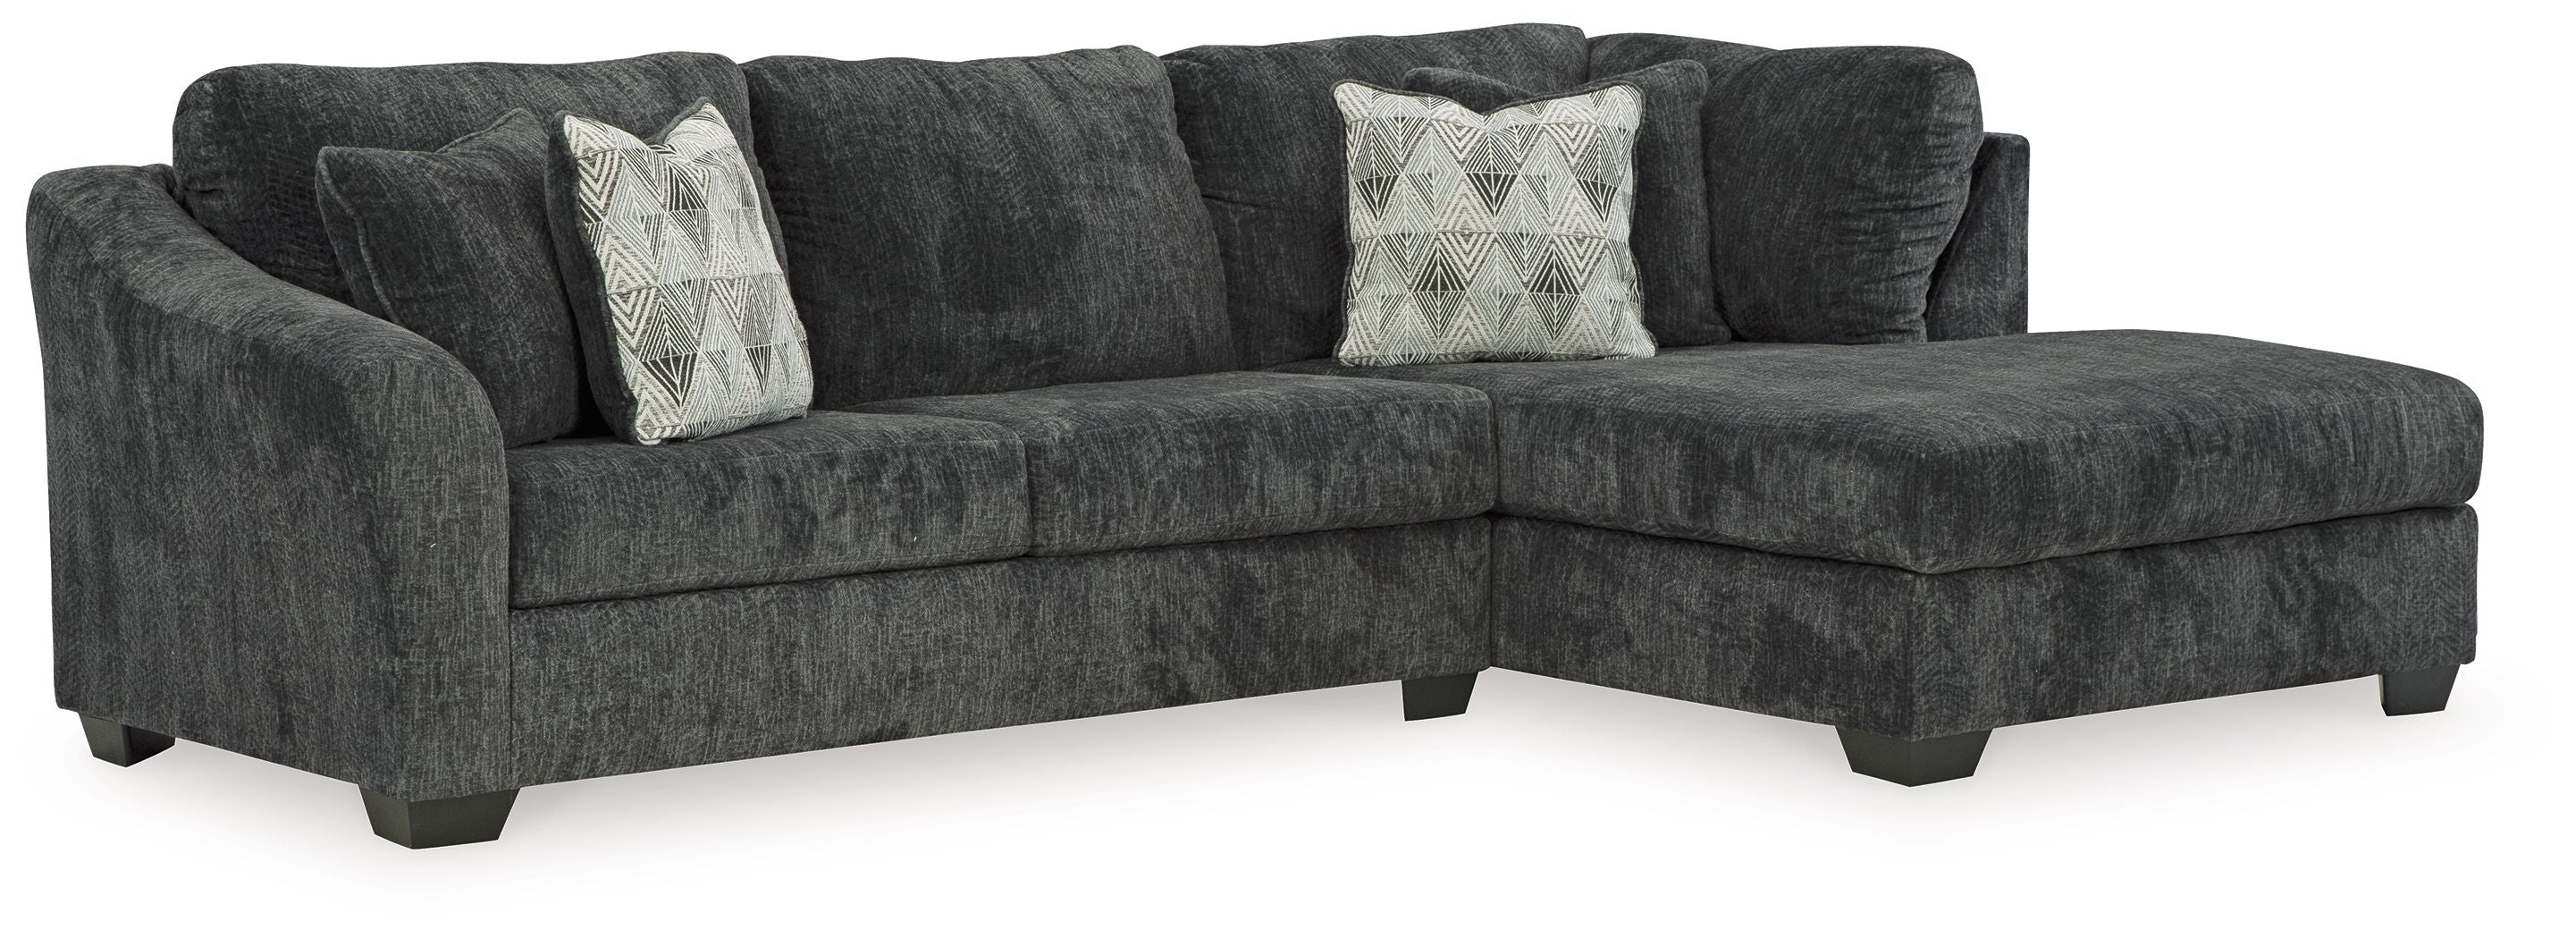 Biddeford Dark Gray 2-Piece L Shaped Sectional-Stationary Sectionals-American Furniture Outlet